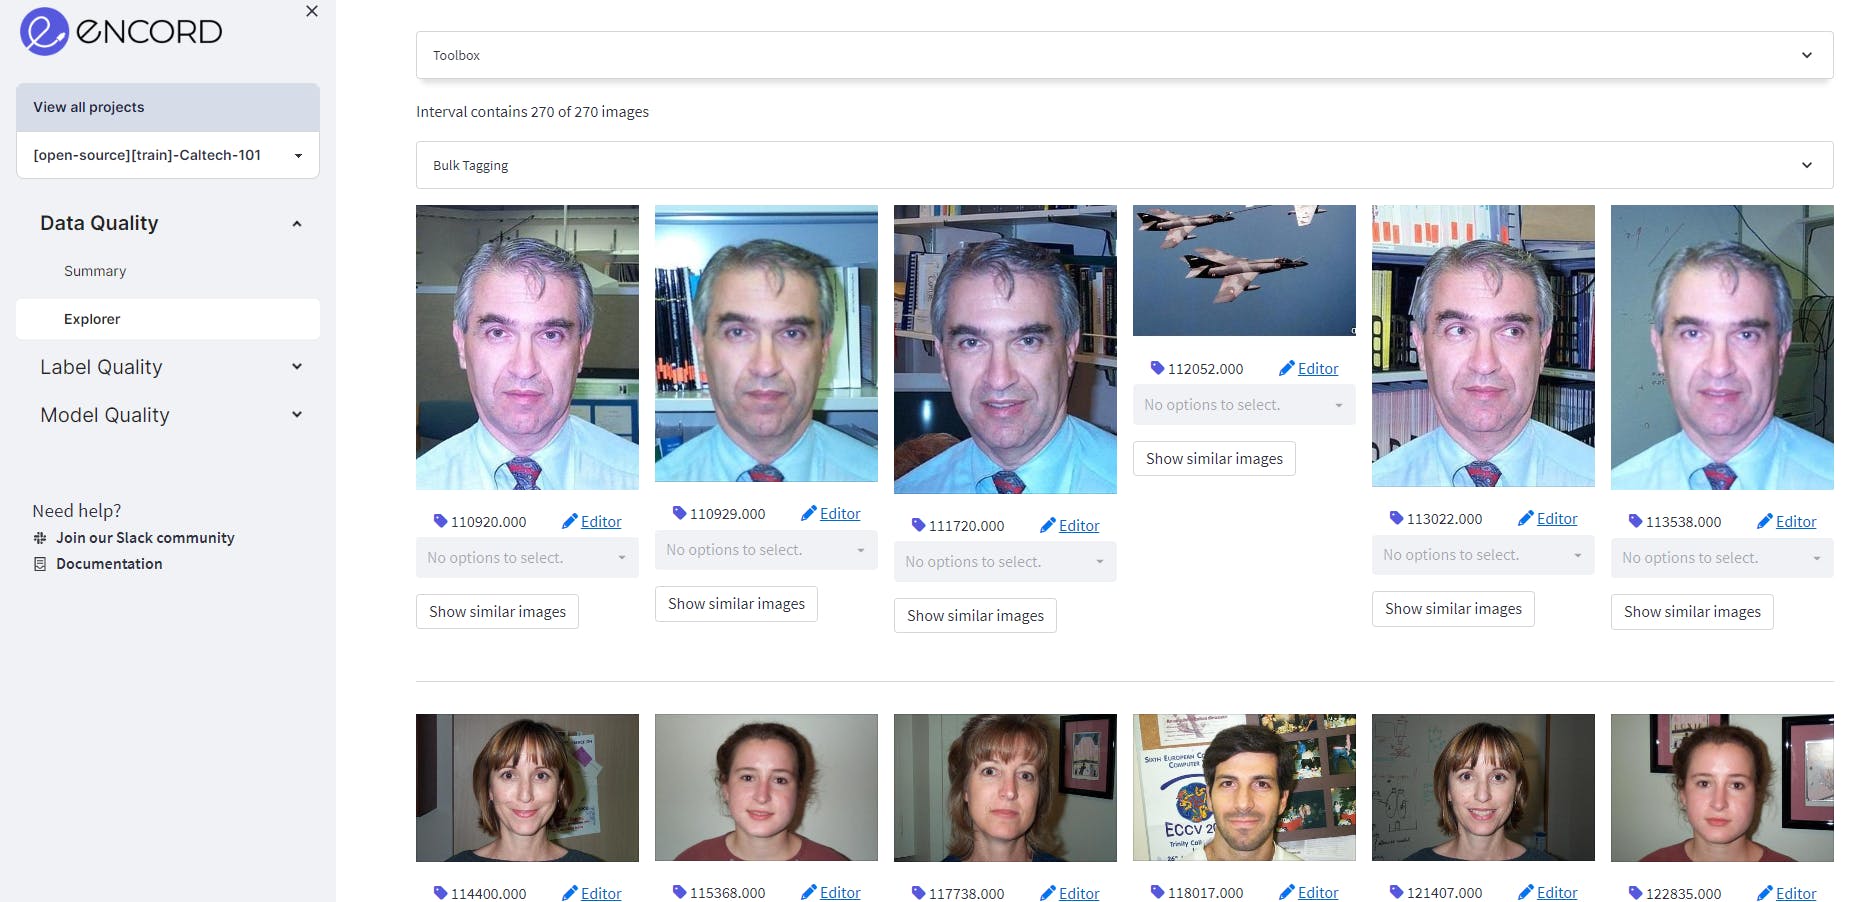 An exmple of images of people's faces in the dataset, using Encord Active to tag them to assess data quality